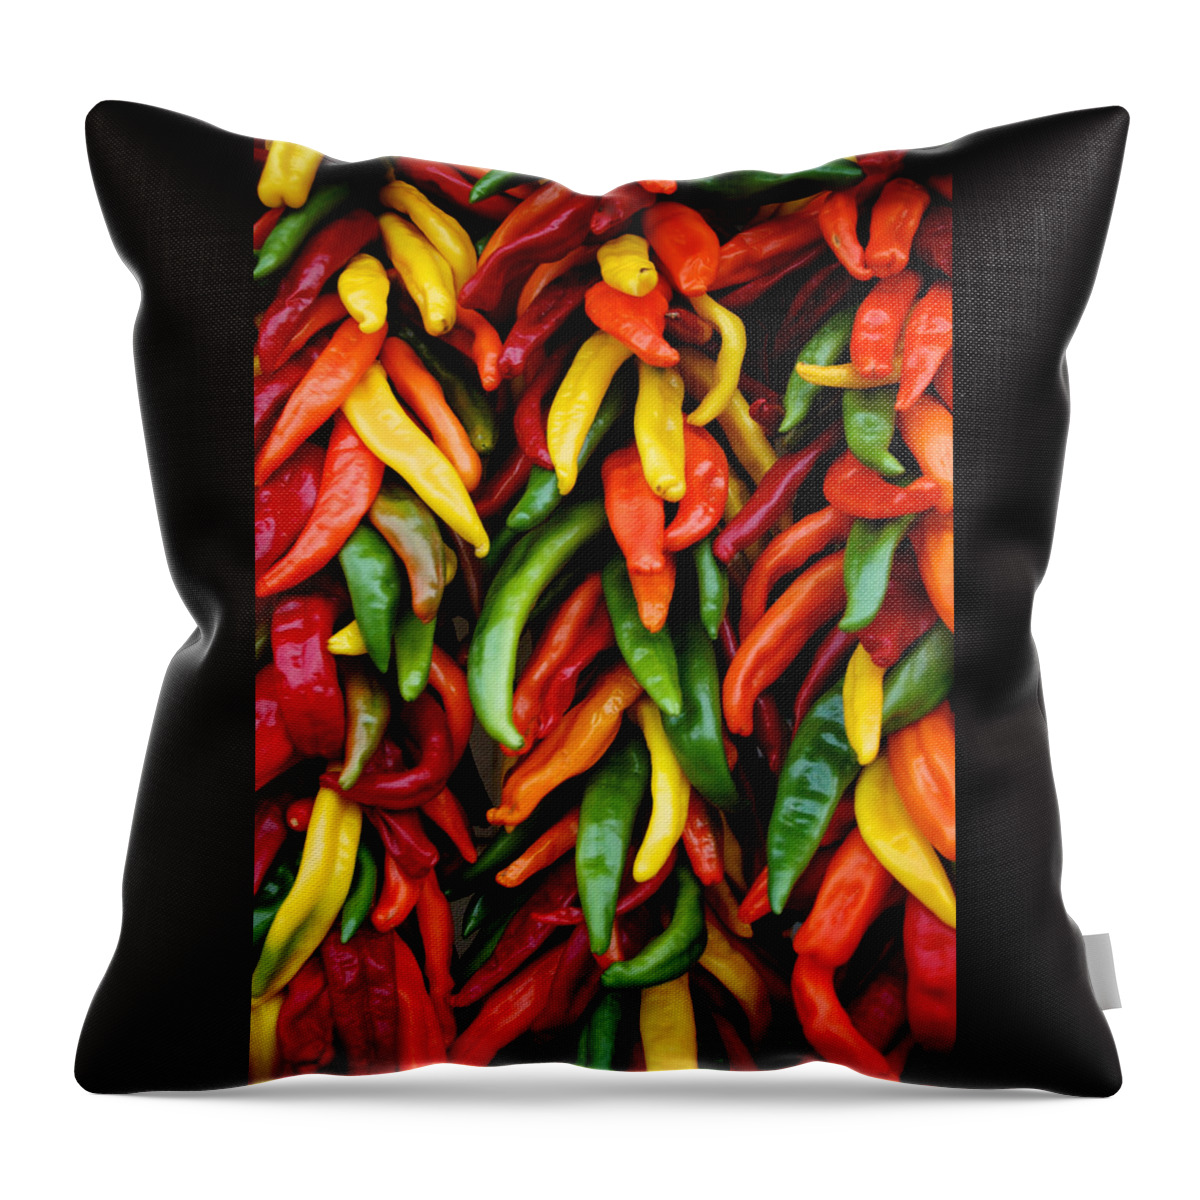 Chile Throw Pillow featuring the photograph Chile Ristras by Mary Lee Dereske